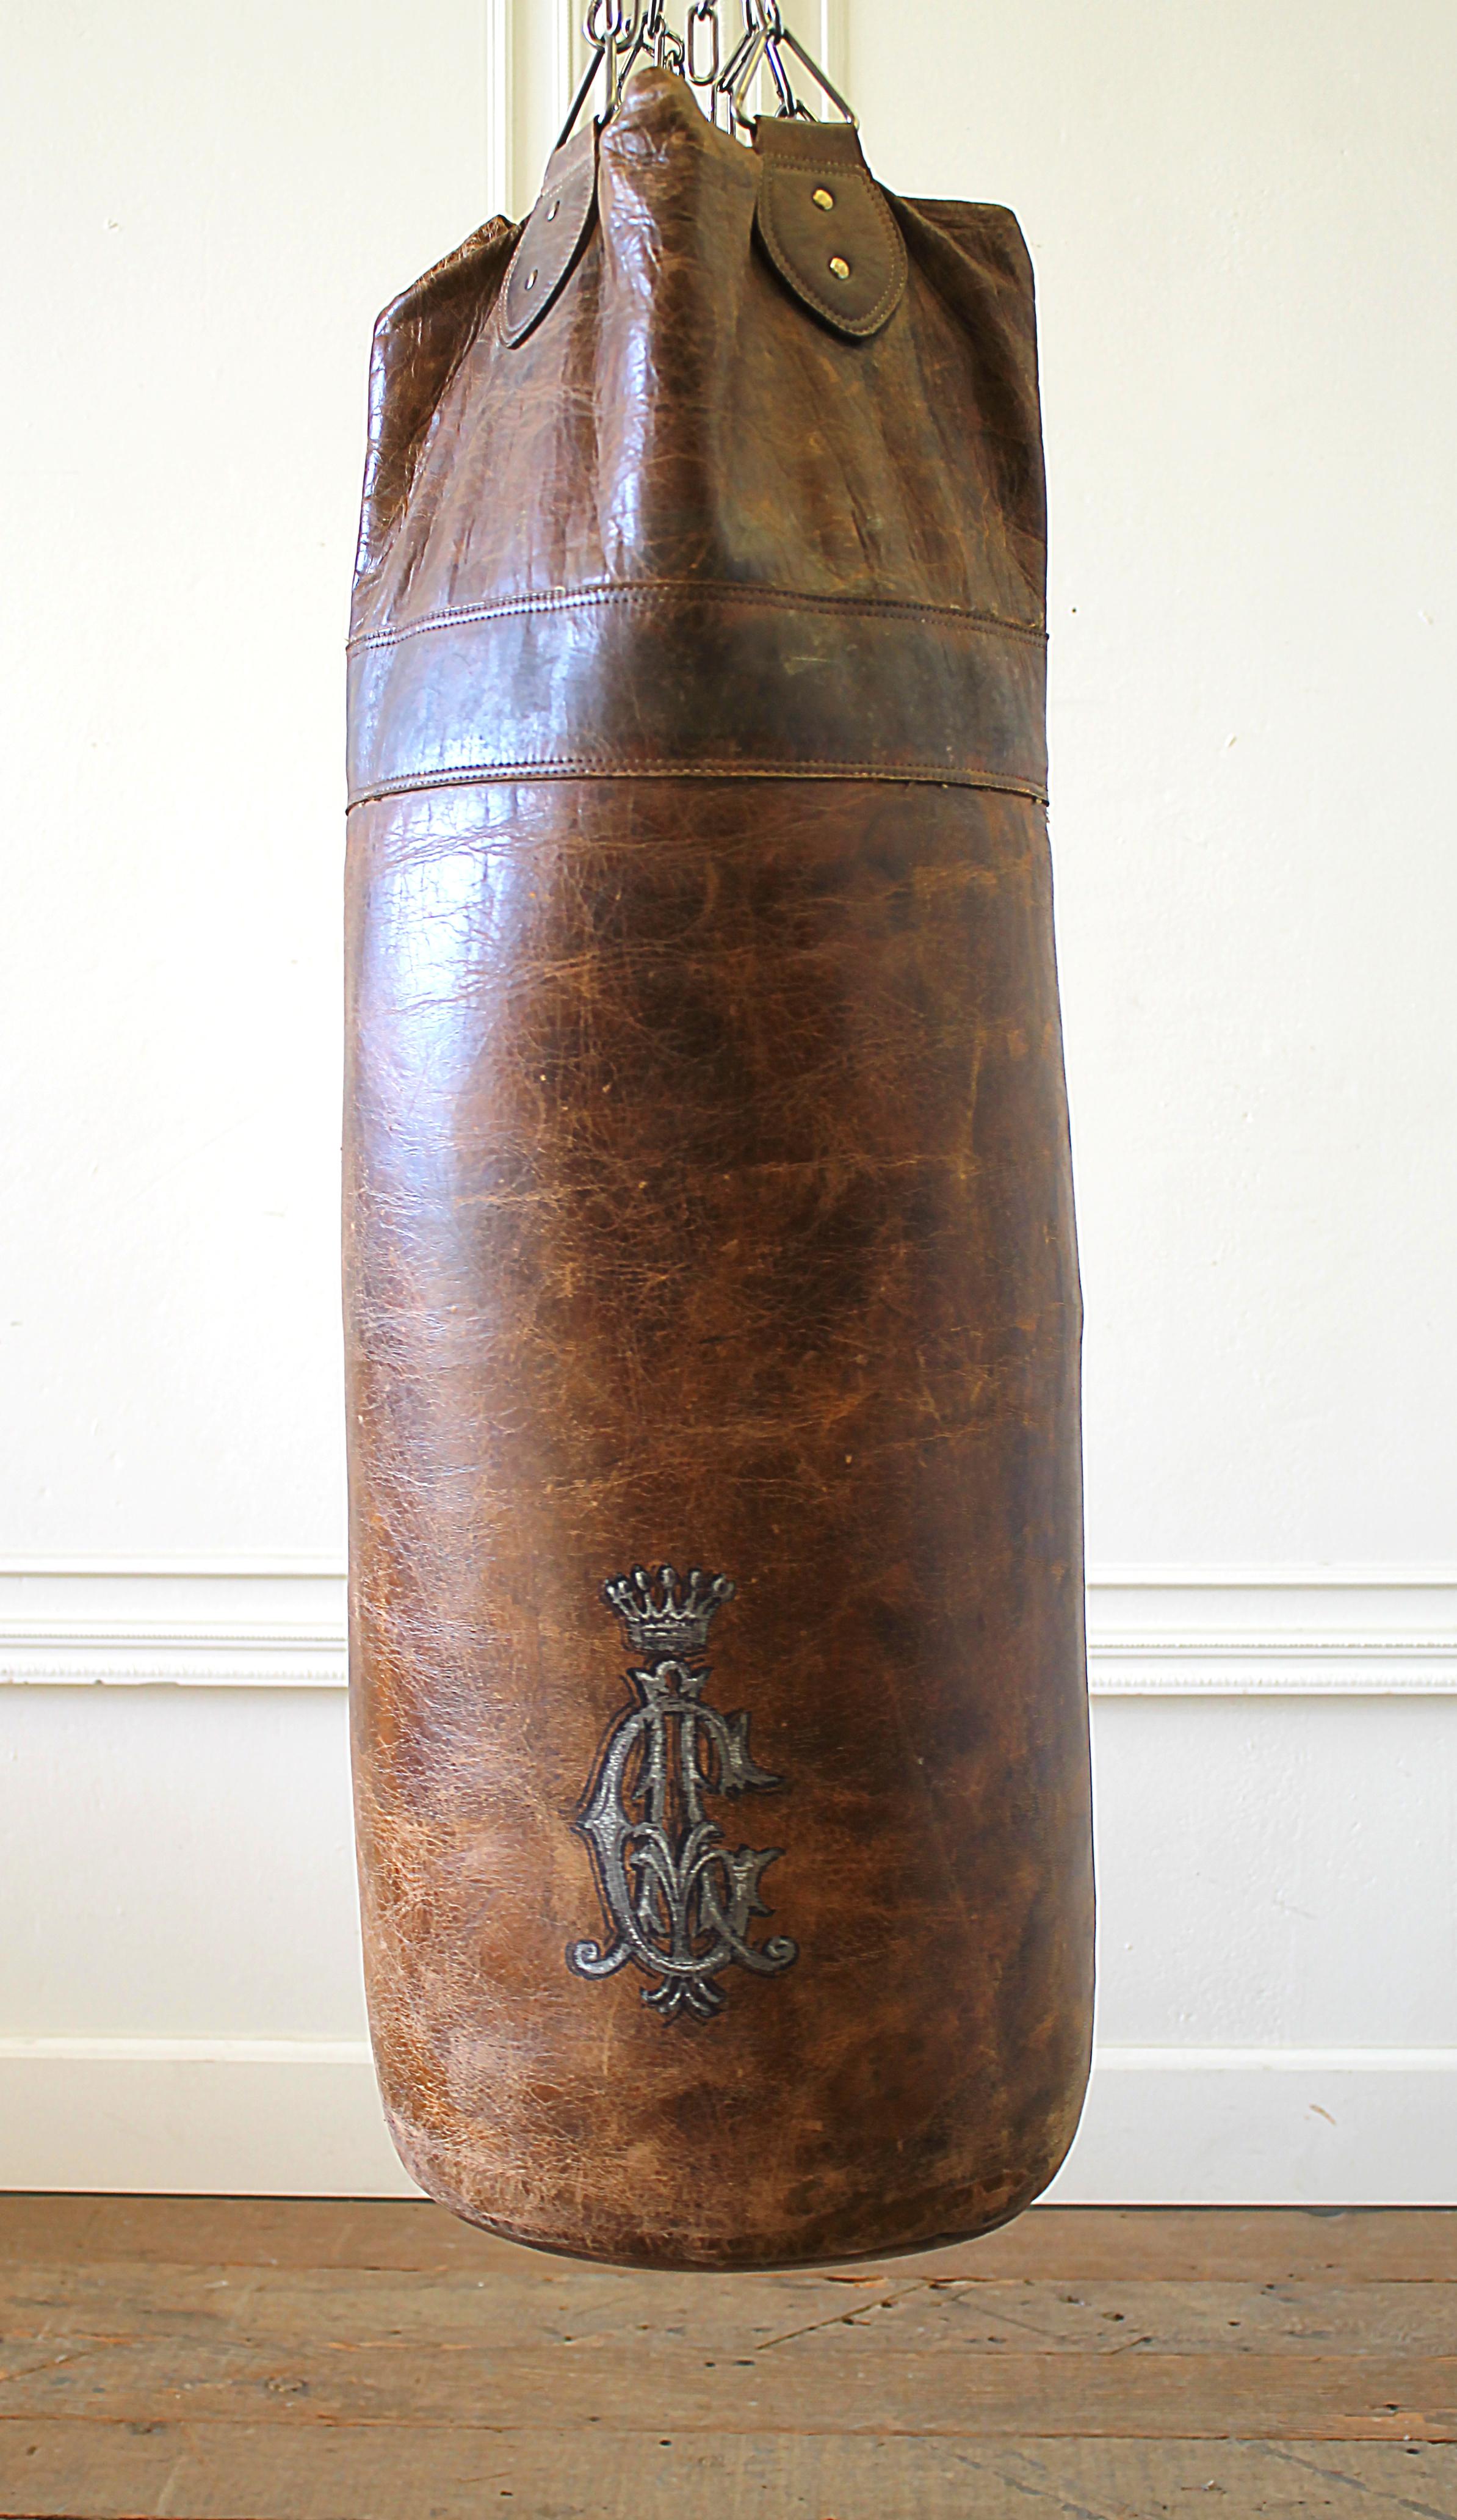 Antique brown leather punching bag, Ireland
With painted monogram 